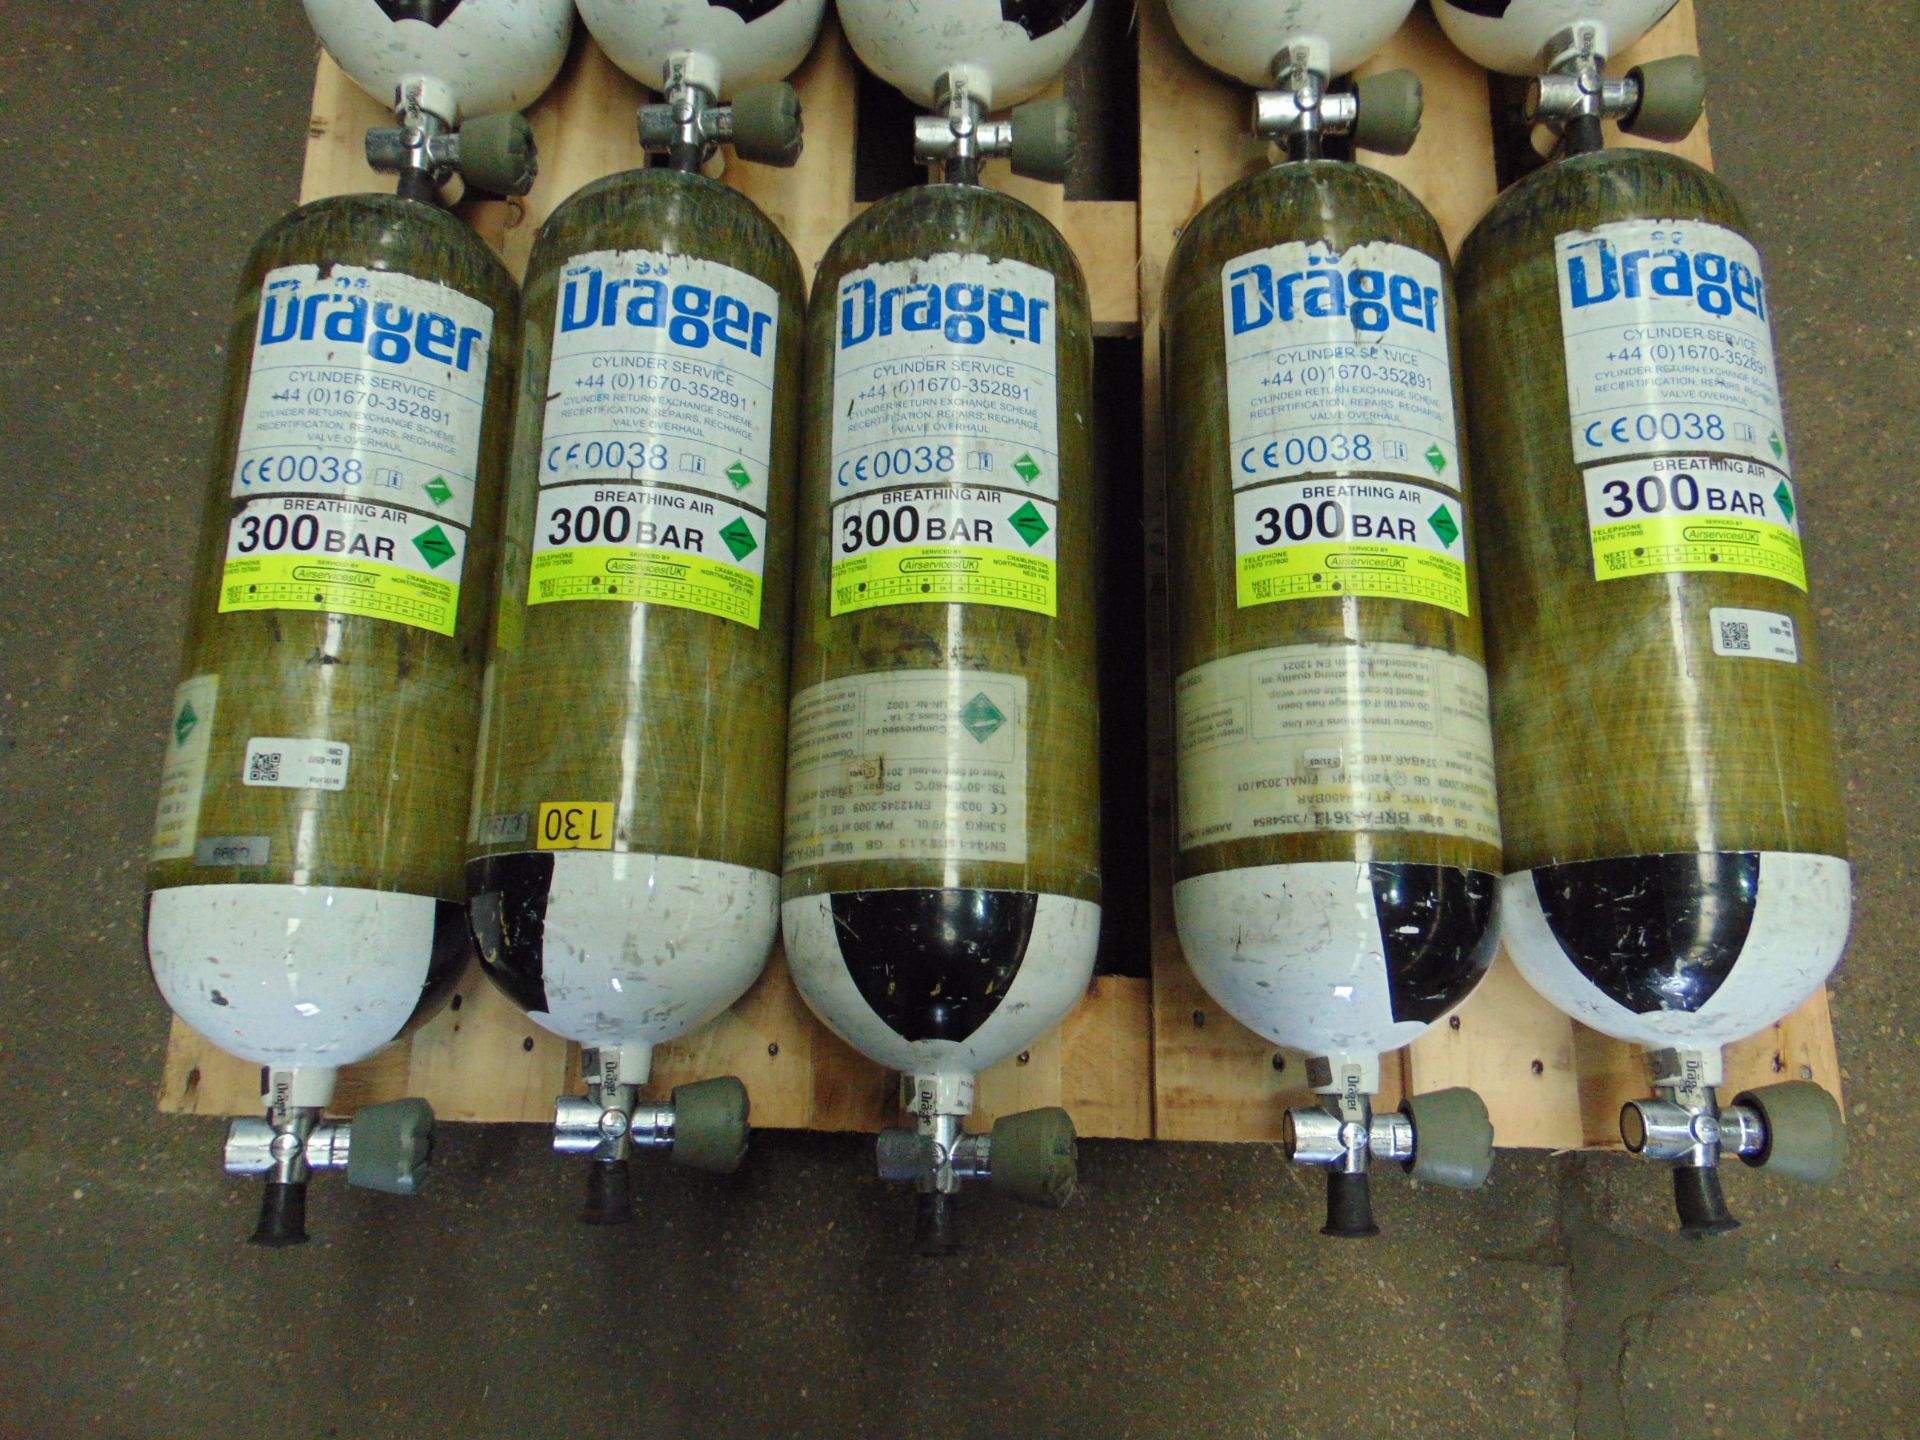 5 x Drager PSS 7000 Self Contained Breathing Apparatus w/ 10 x Drager 300 Bar Air Cylinders - Image 4 of 22